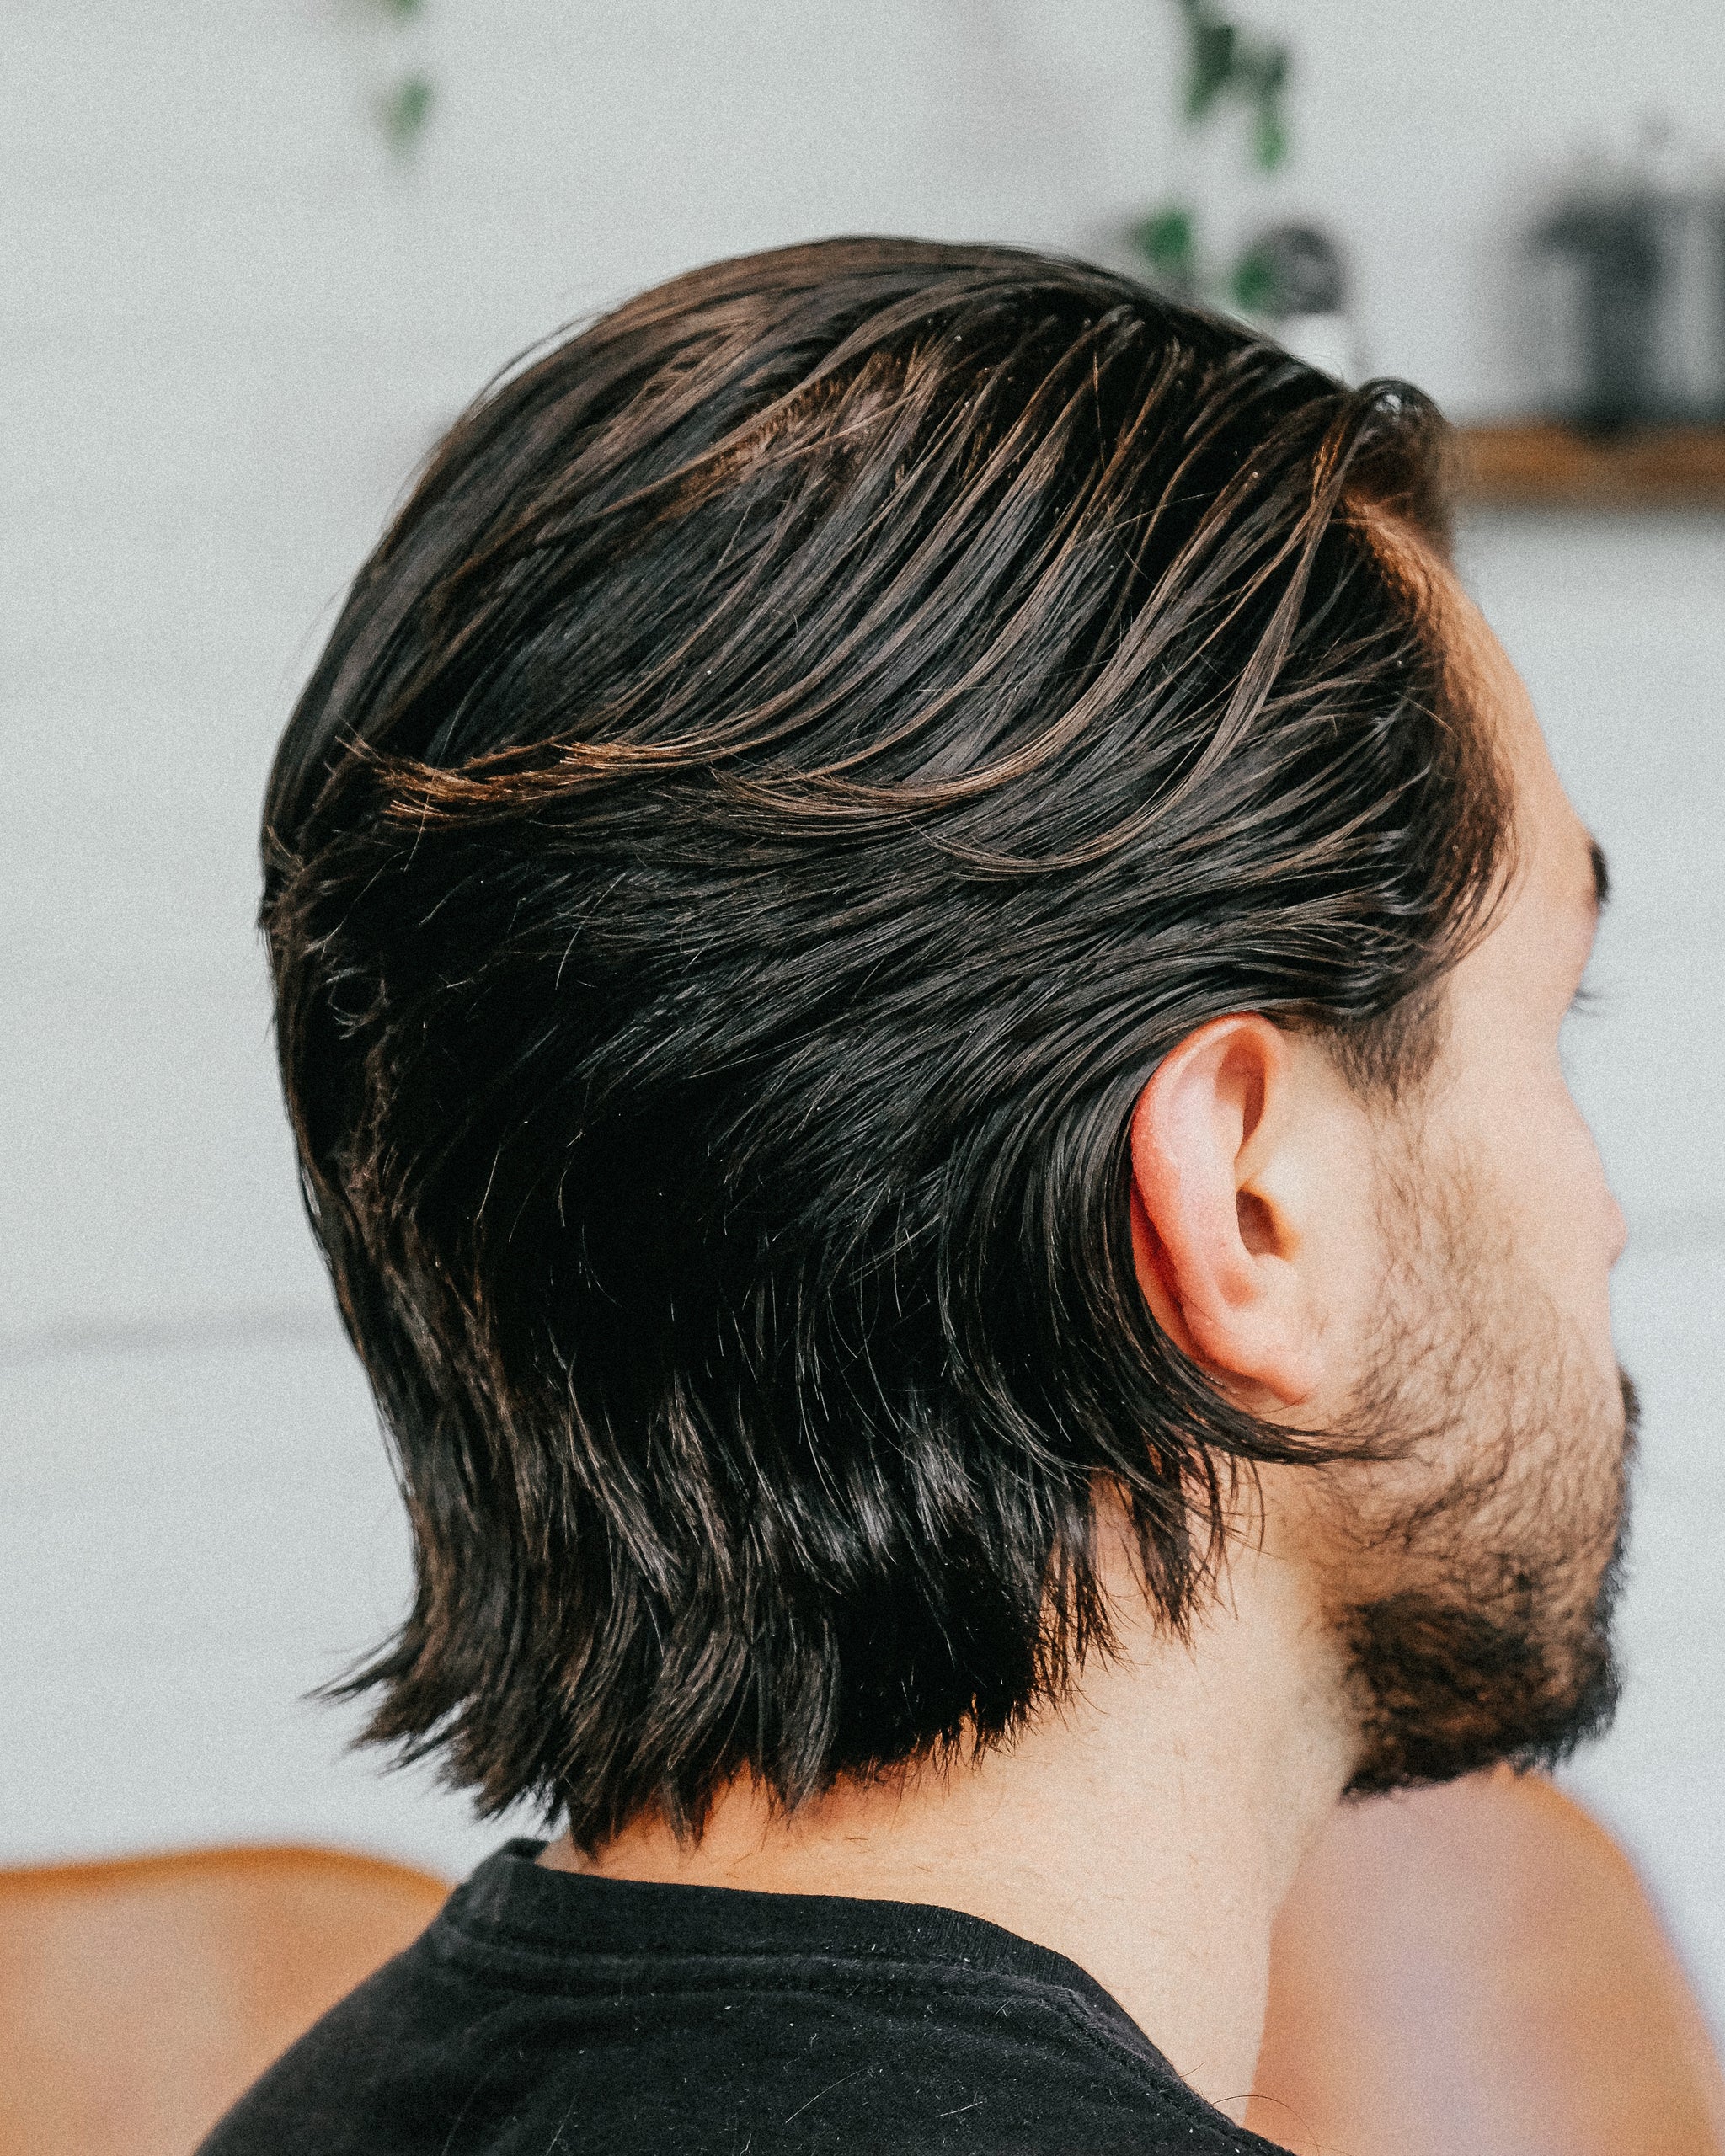 Do Hair Growth Supplements Actually Work?